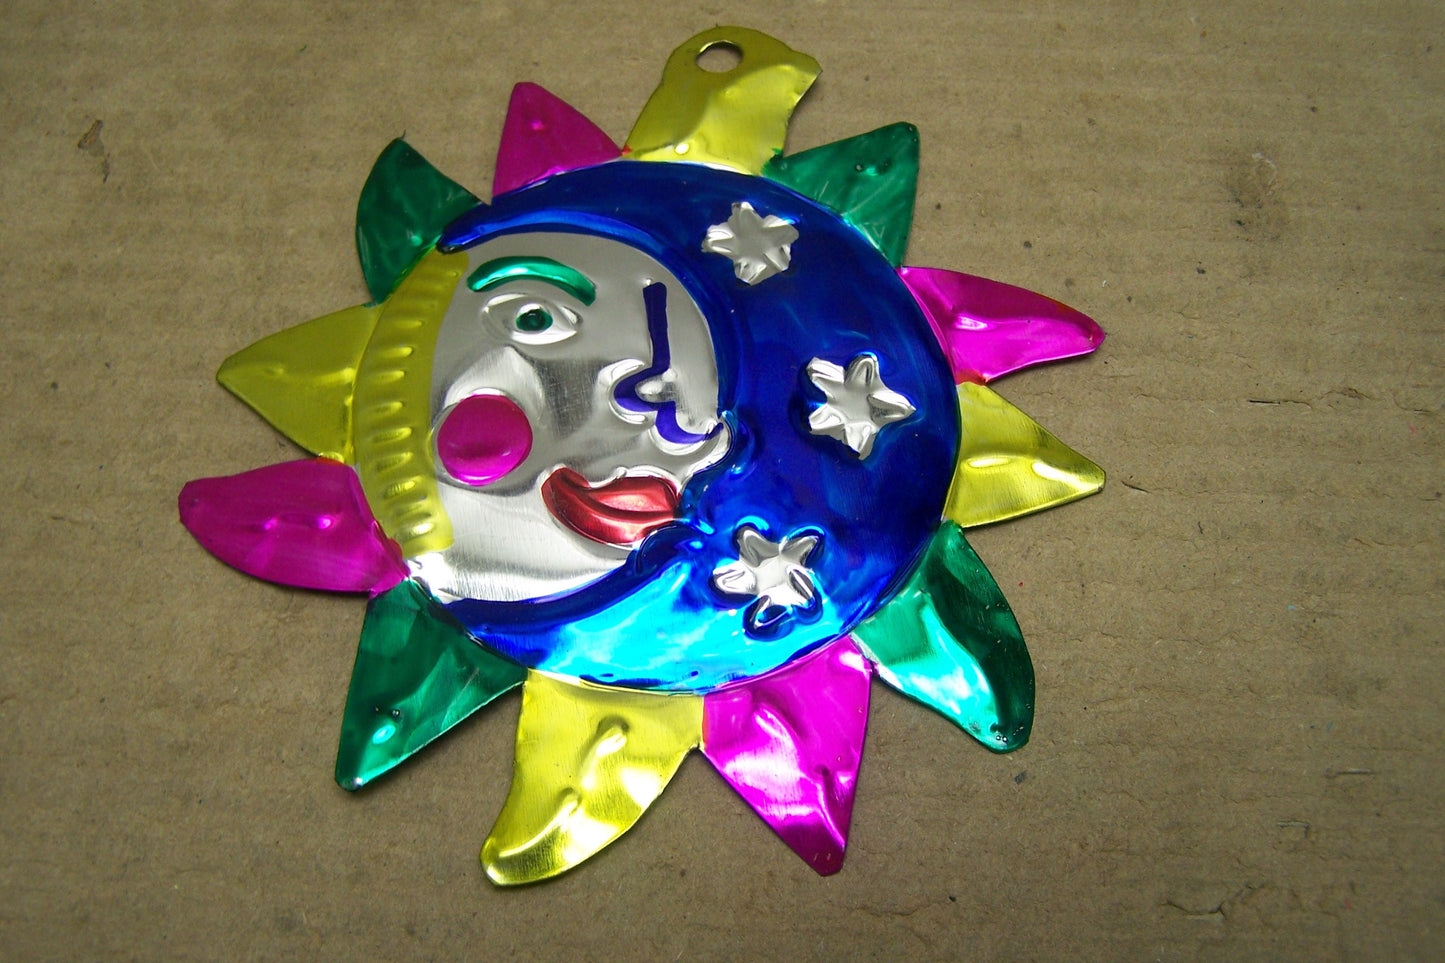 Lot of 6 Tin Painted Sun and Moon, Sol y Luna Ornaments - Multicolored Rays - Mexico